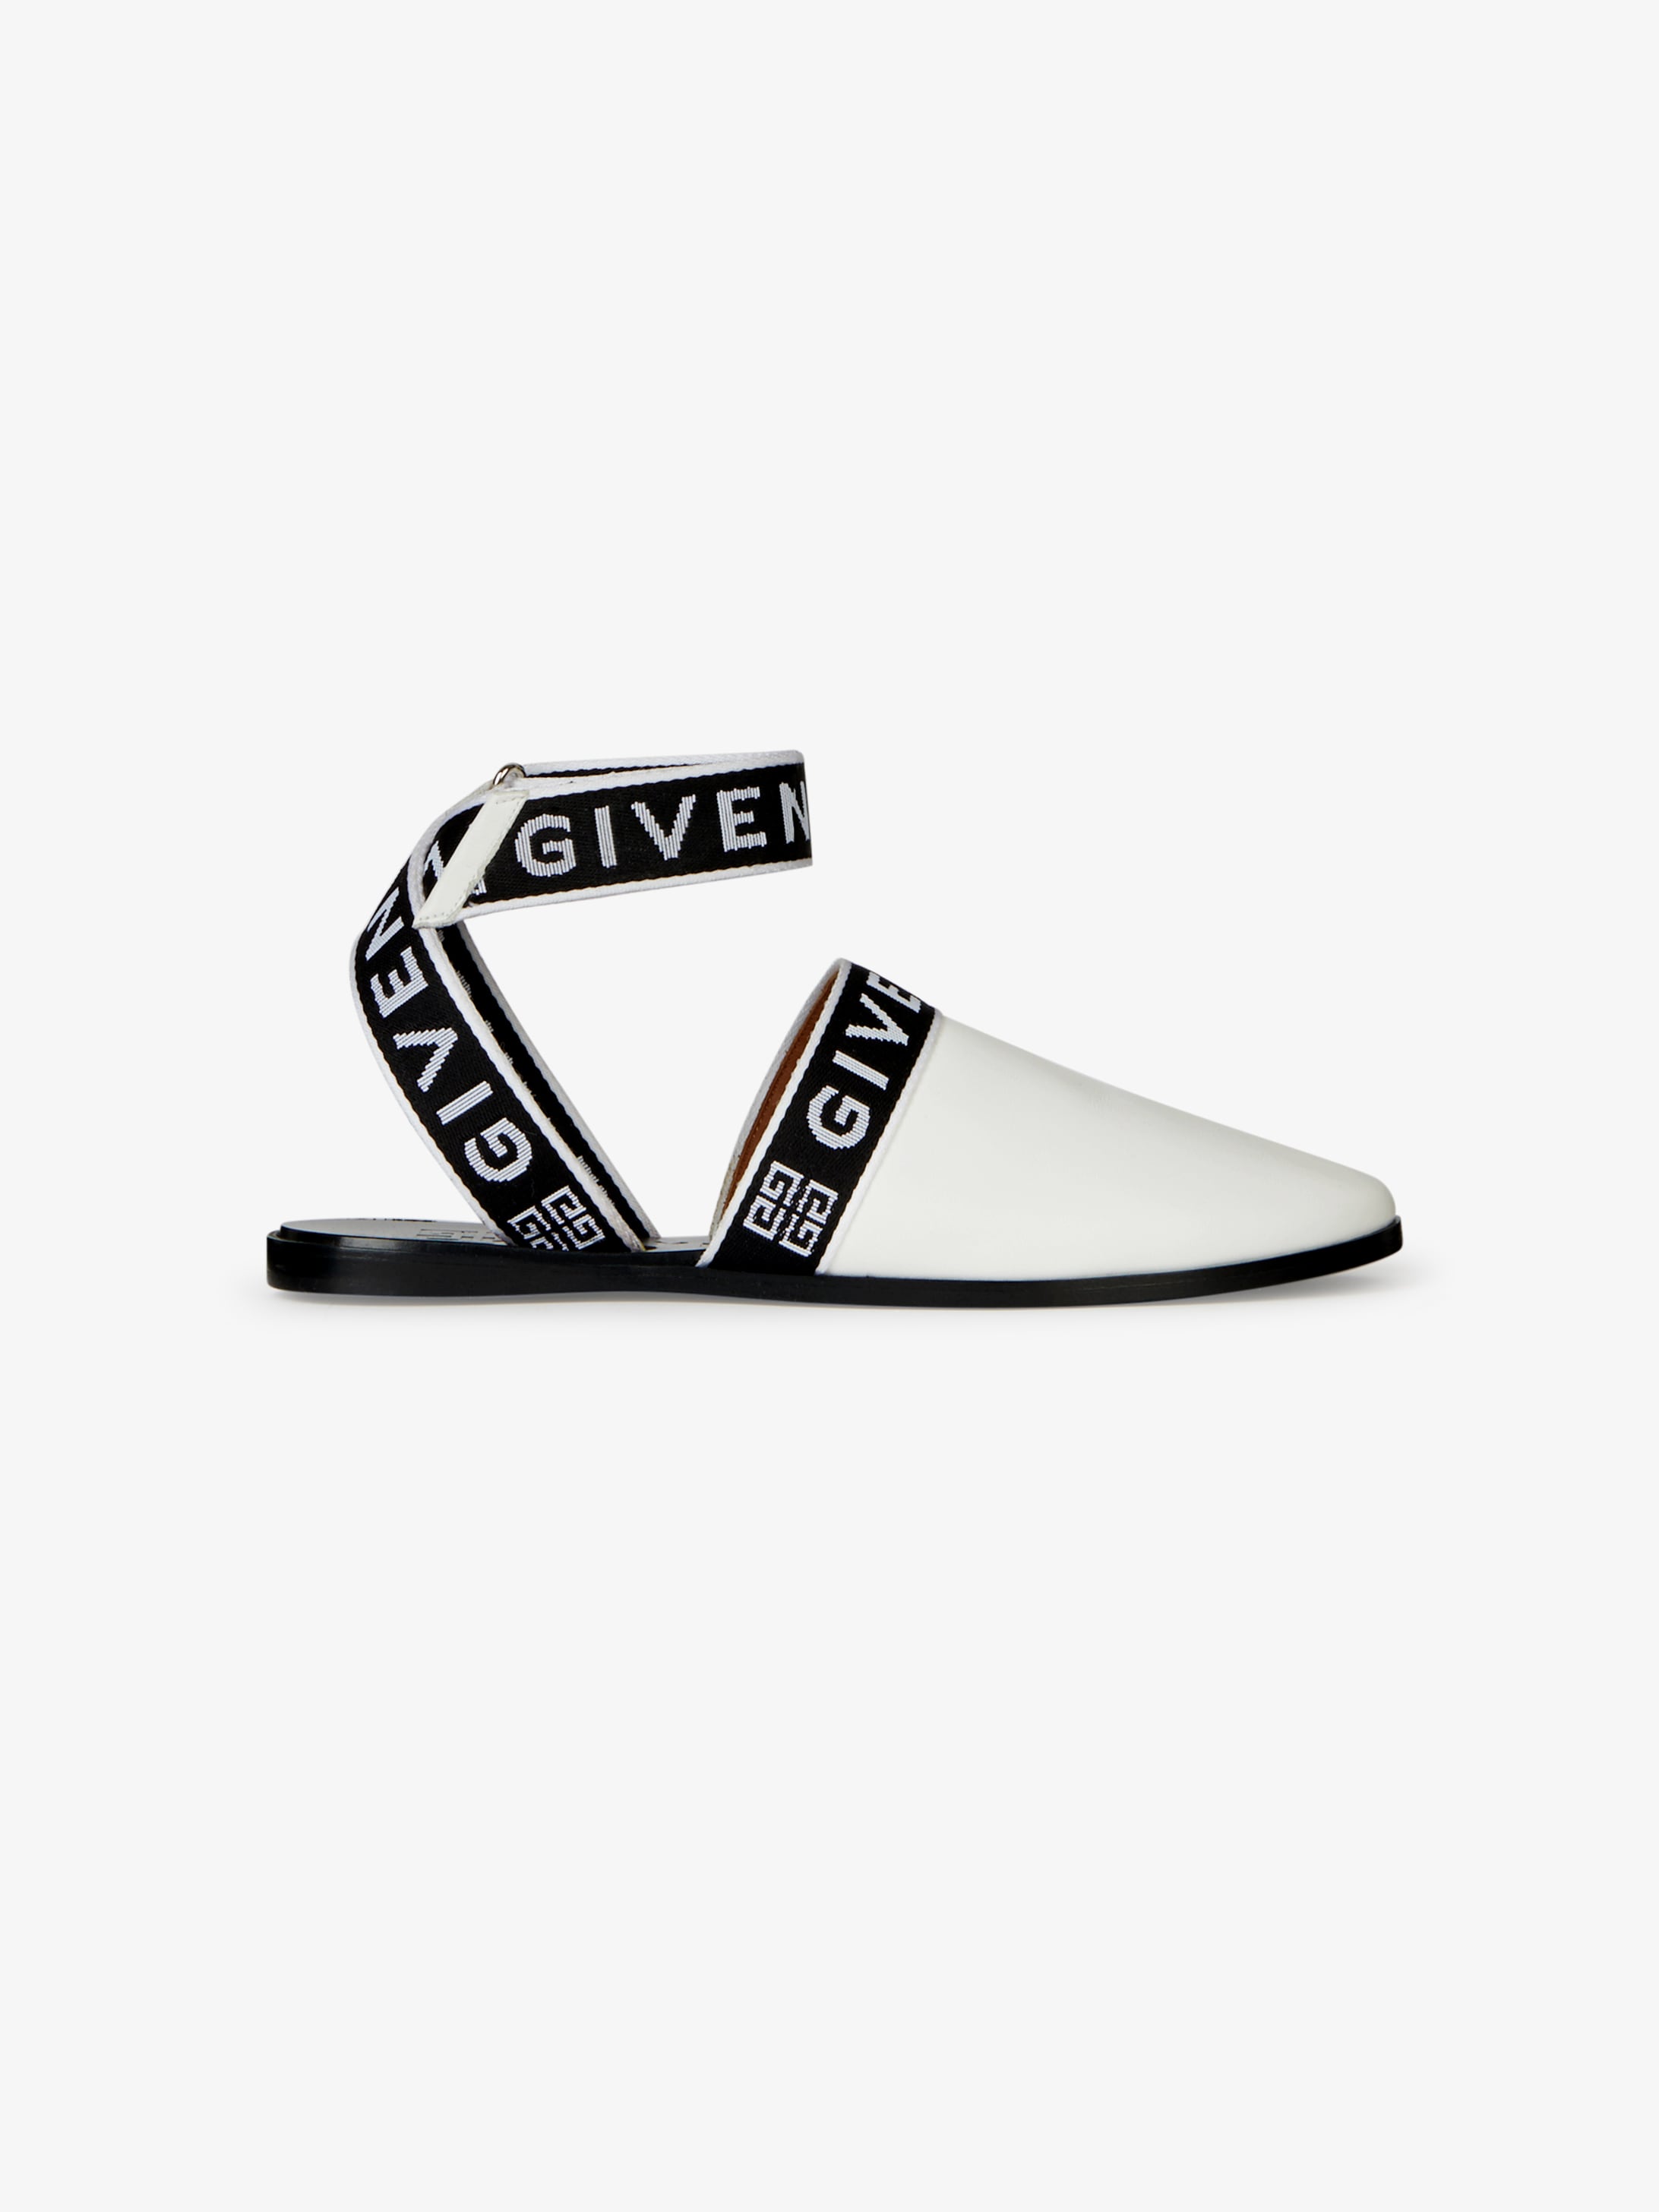 4G GIVENCHY sling back mules in leather 